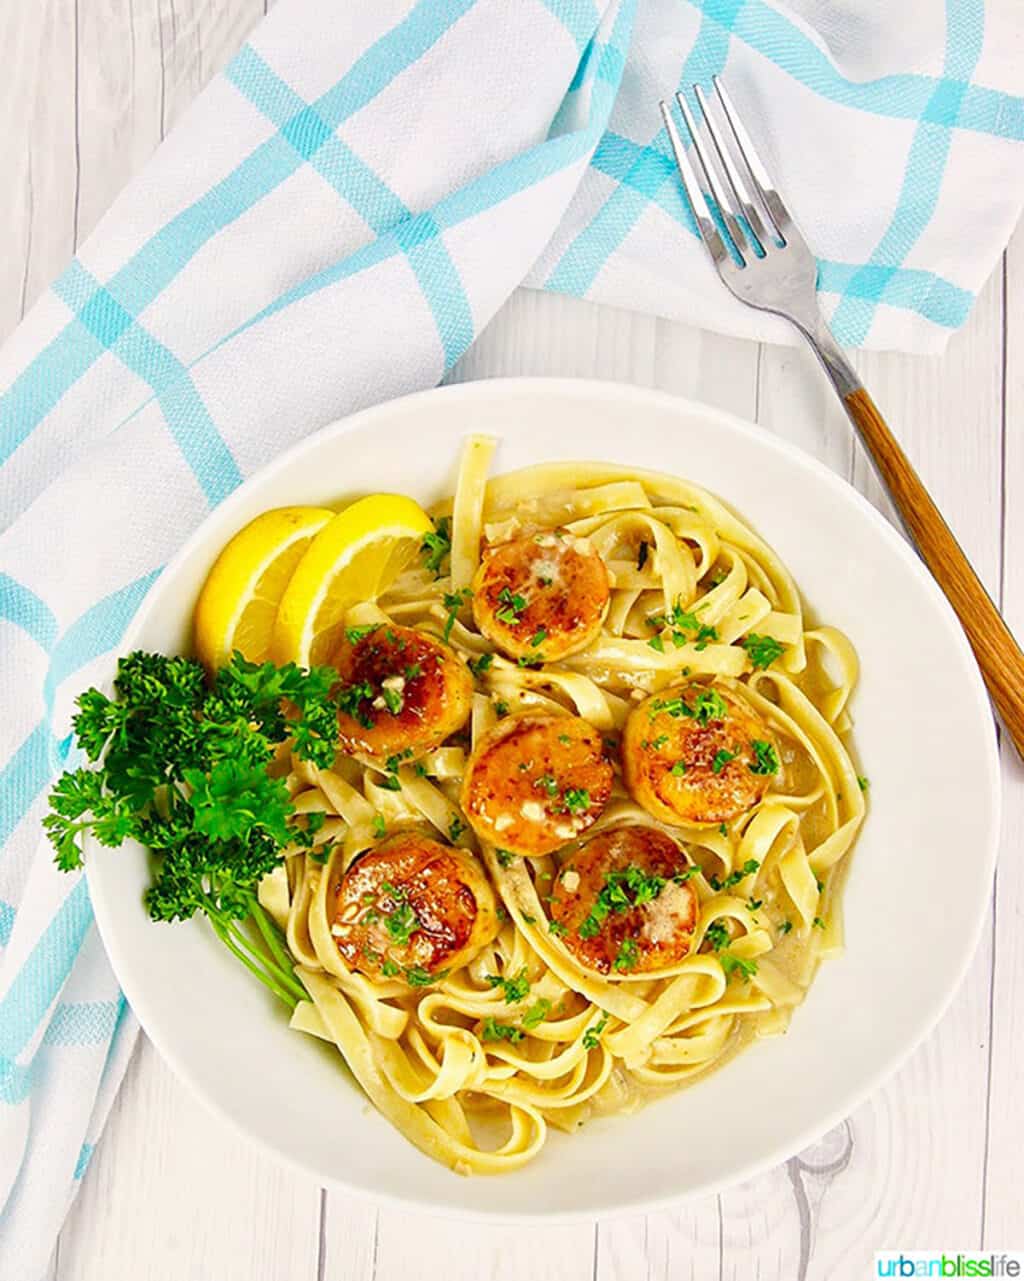 Seared scallops with pasta in a bowl